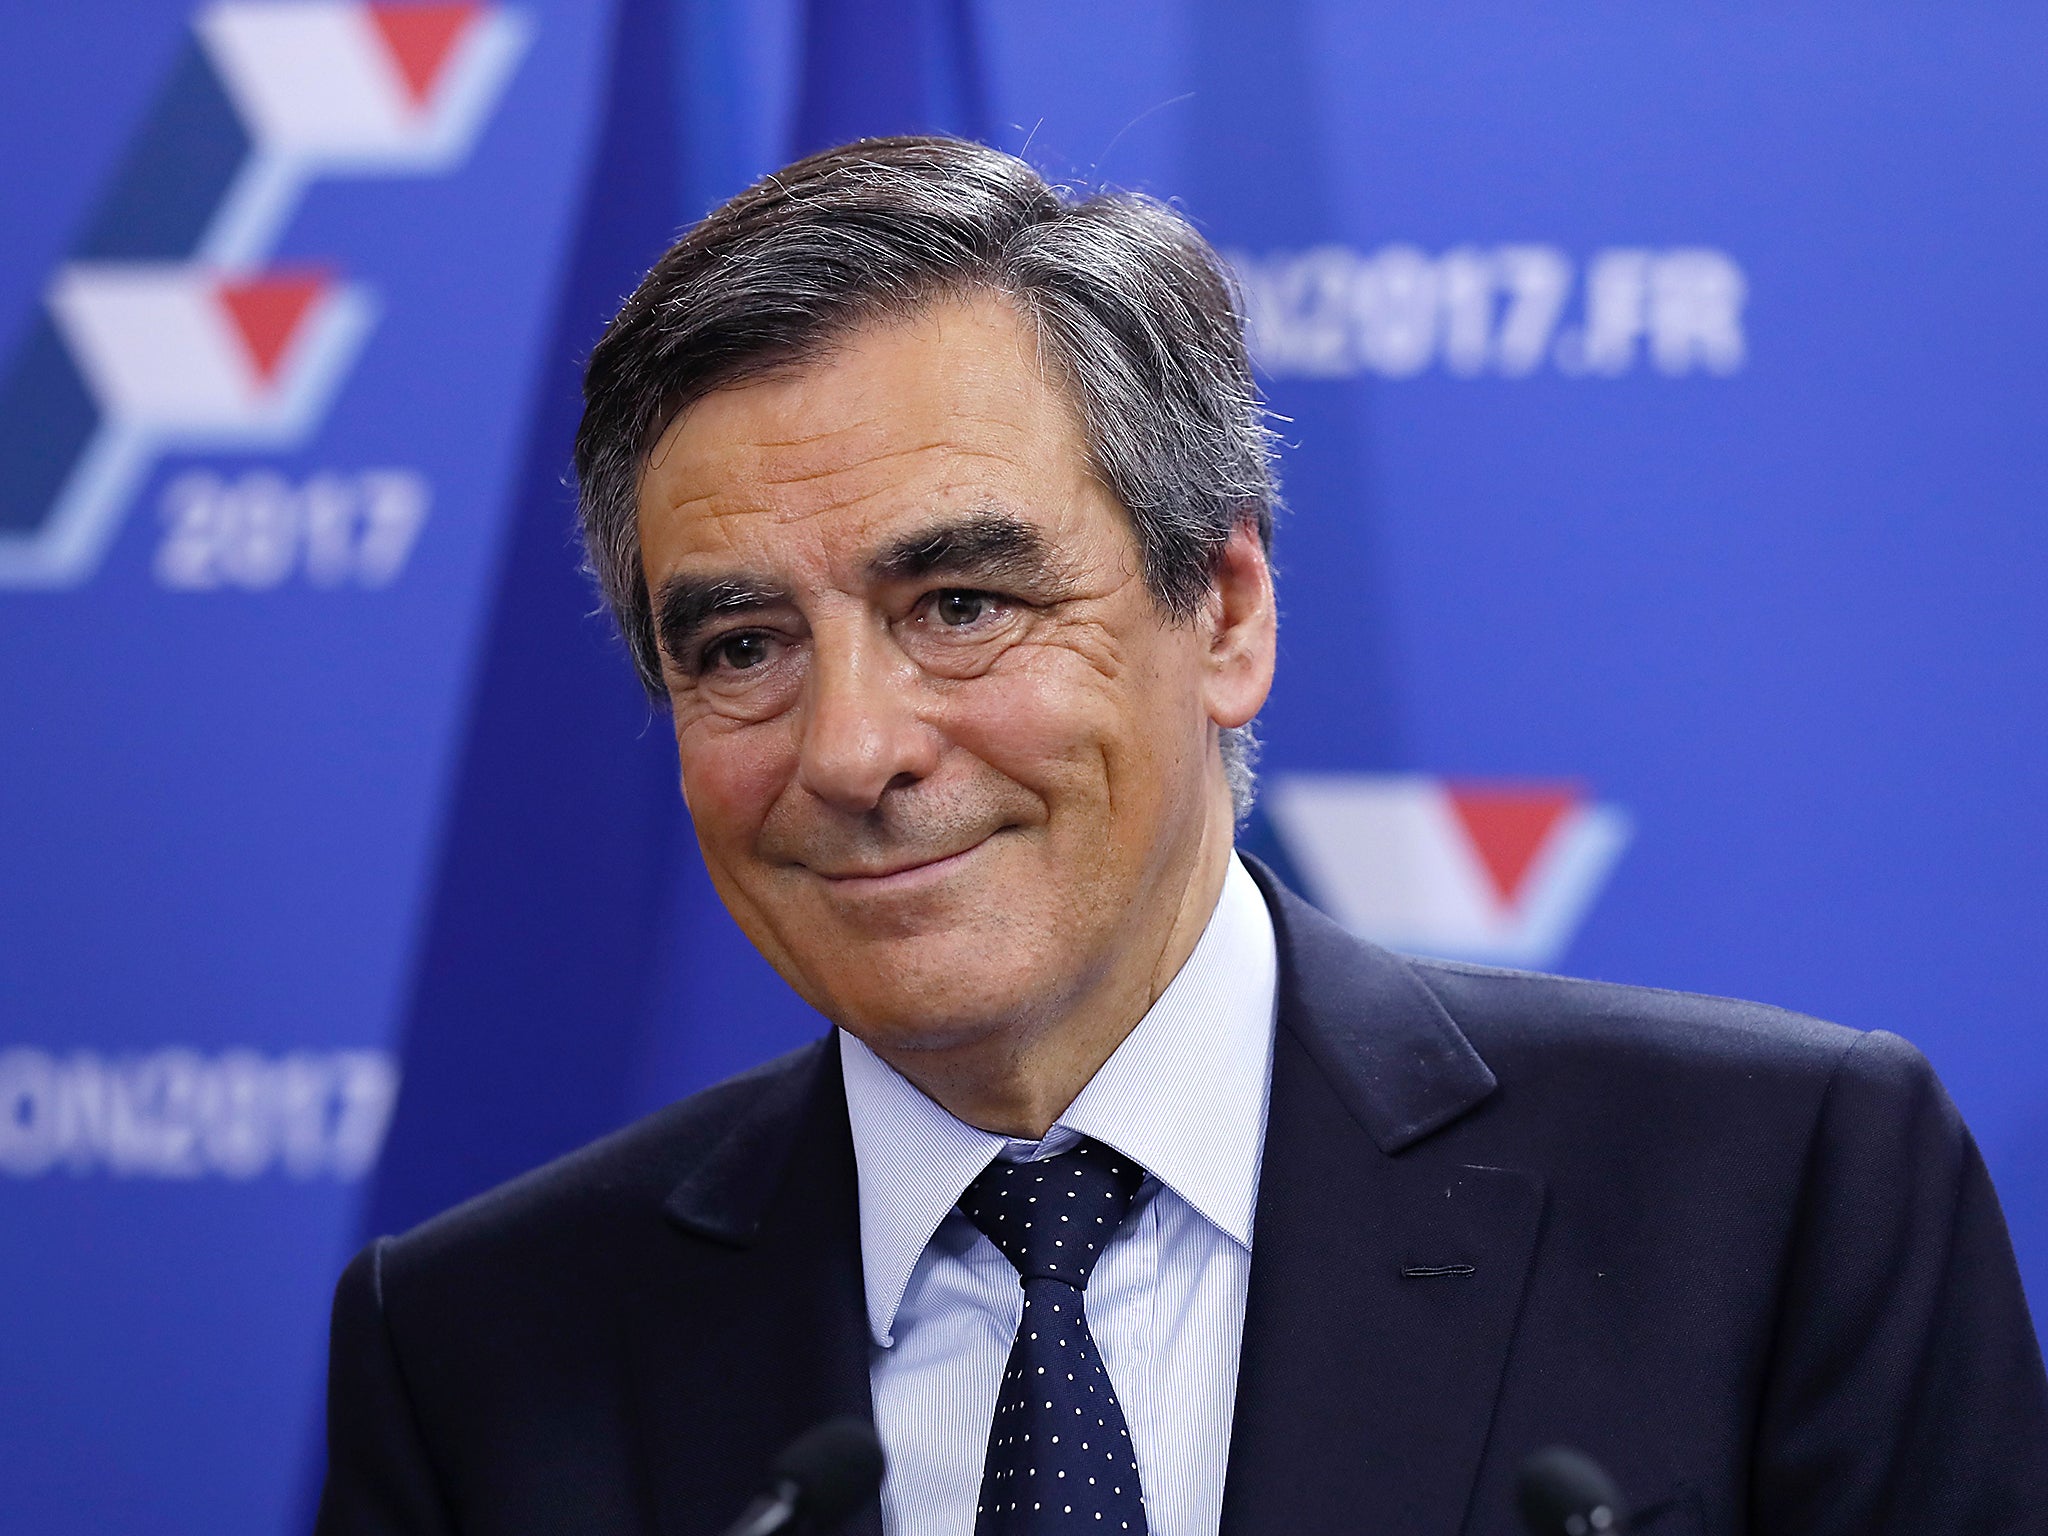 &#13;
François Fillon is the subject of an embezzlement probe following allegations in a French newspaper &#13;